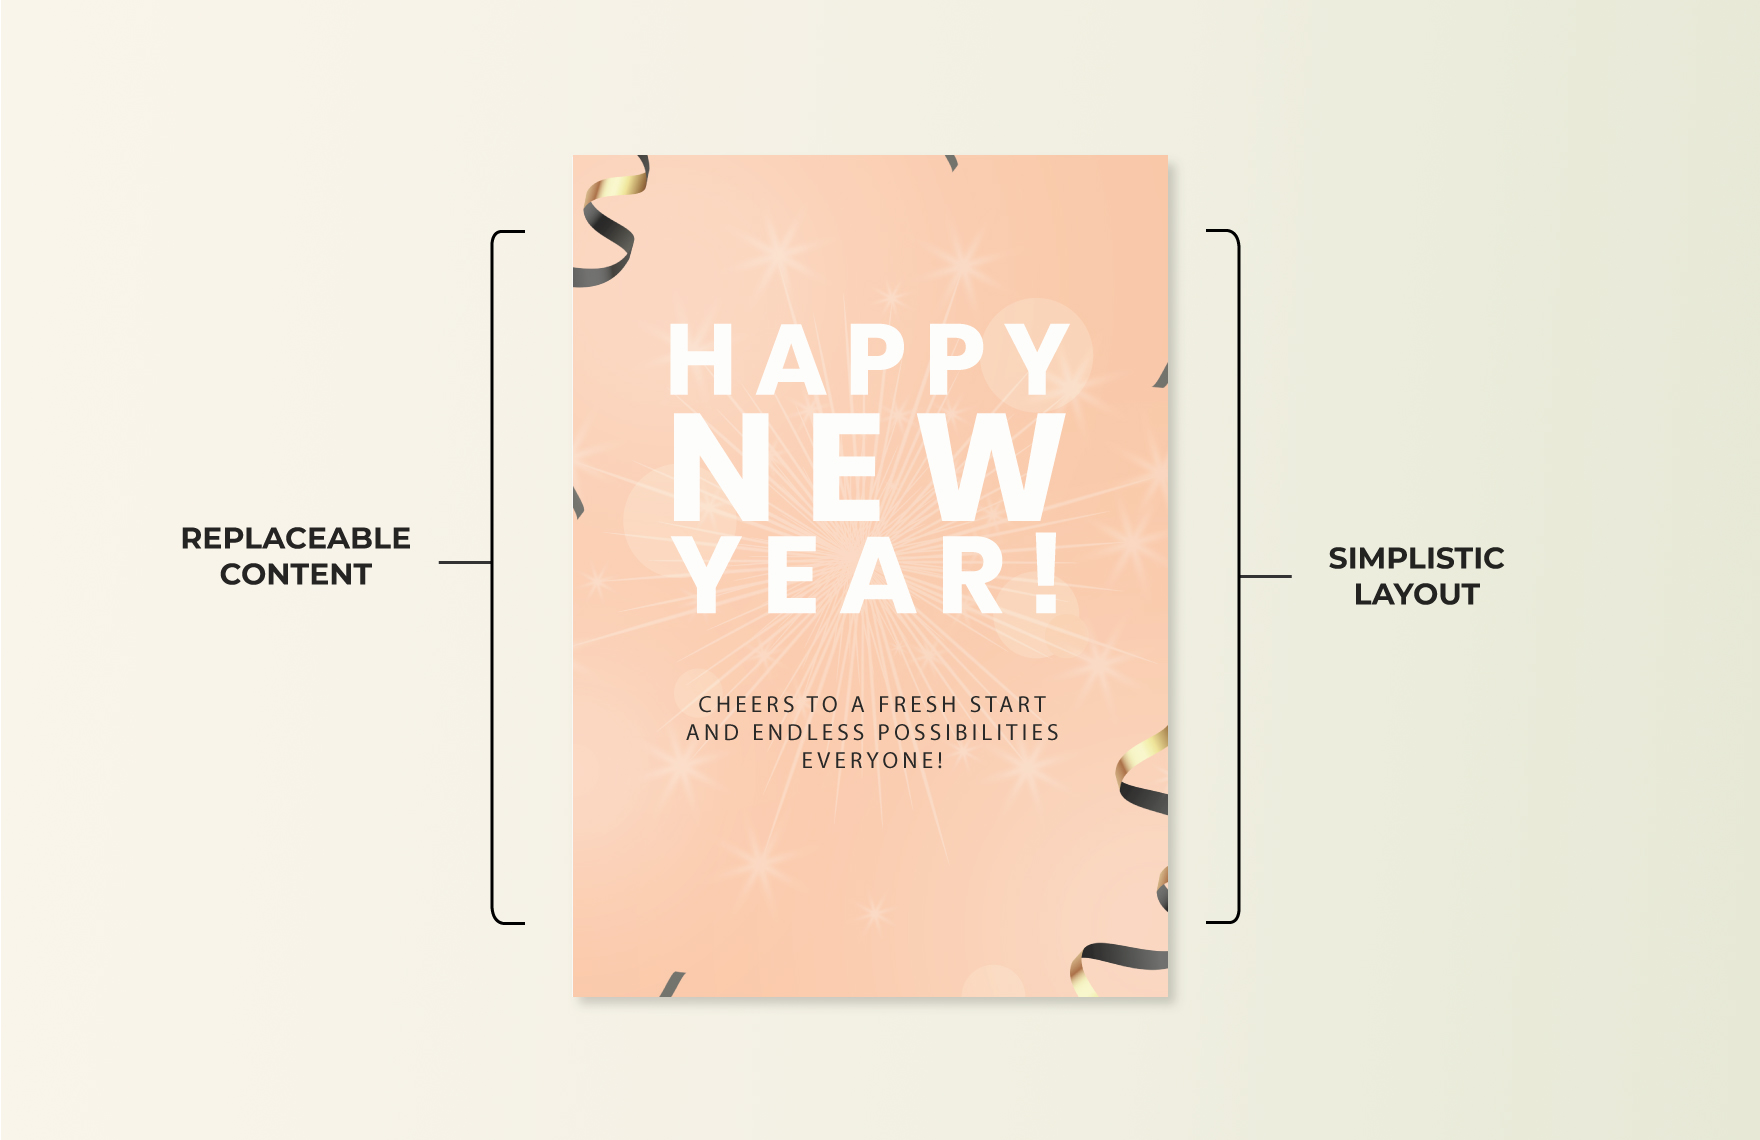 New Year Greeting Template